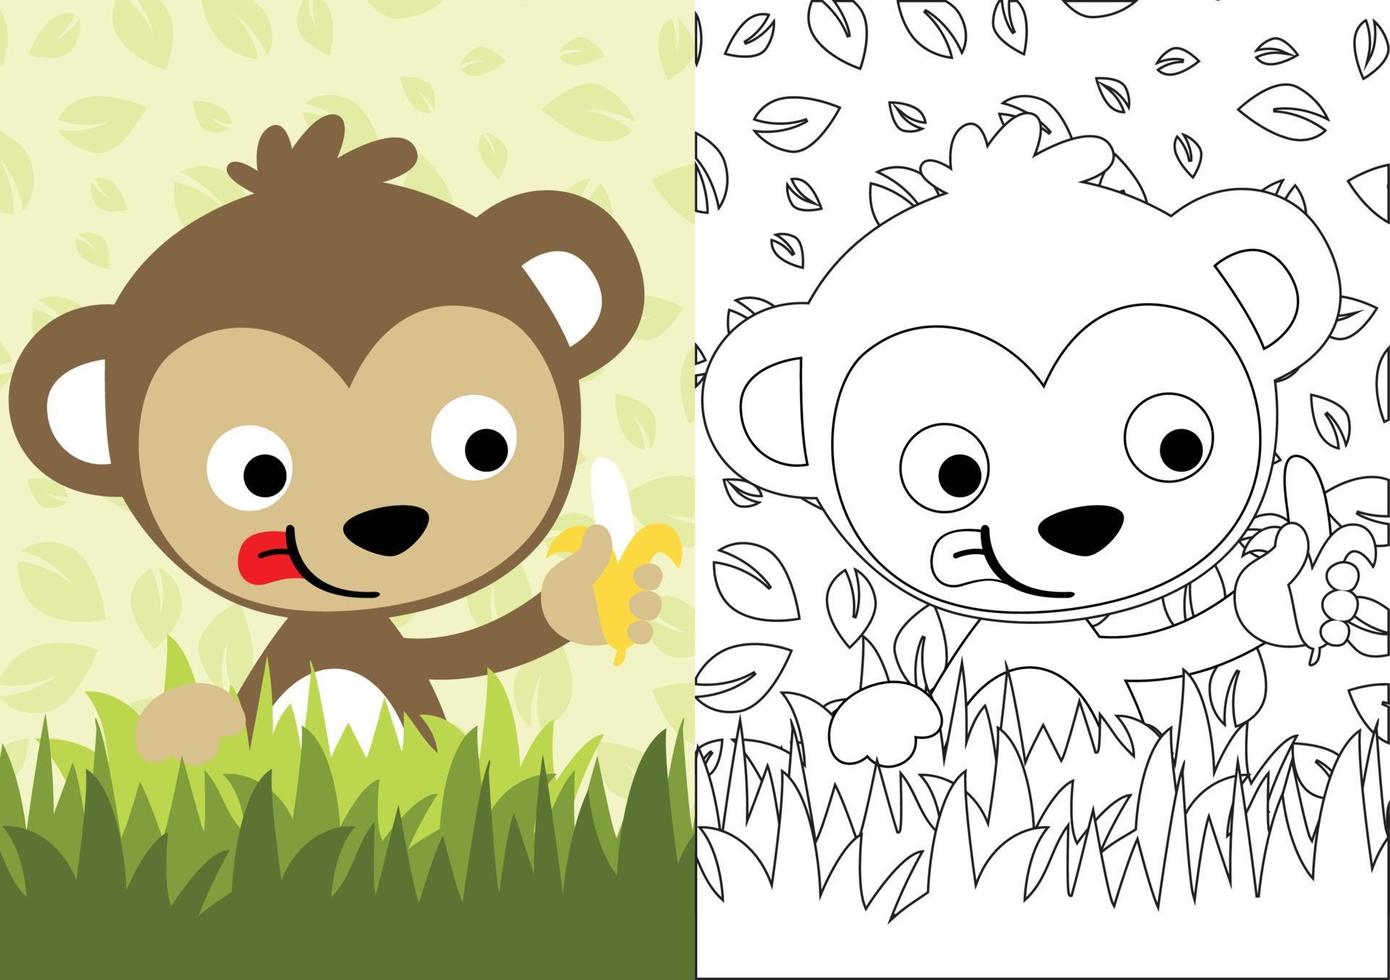 vector cartoon of monkey holding banana on leaves background, coloring book or page